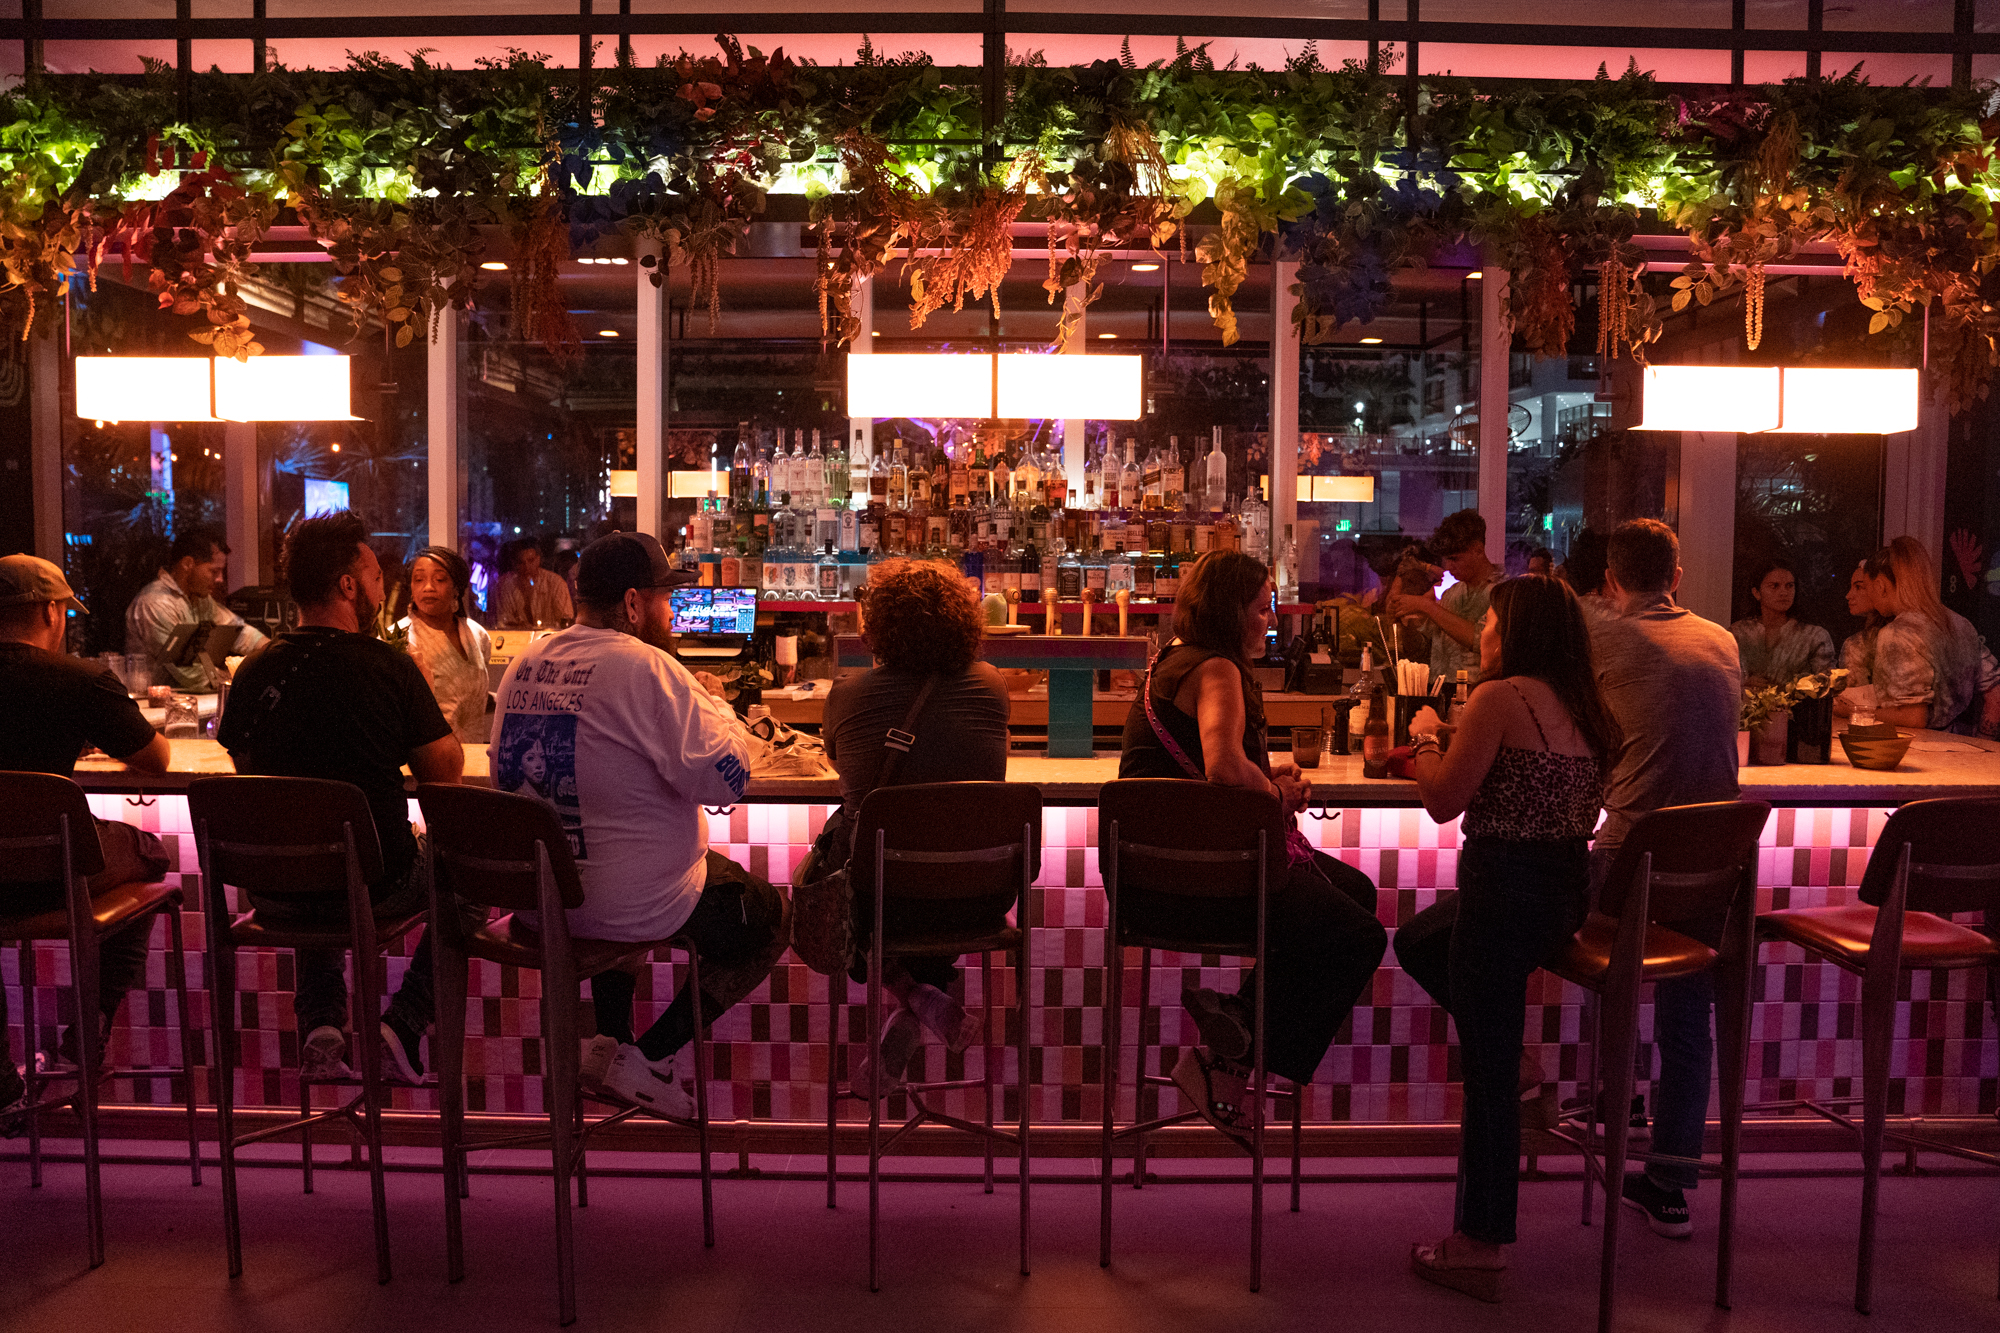 A group of people sit and stand around a bar counter in a dimly lit, vibrant setting adorned with hanging greenery and illuminated by soft lighting.